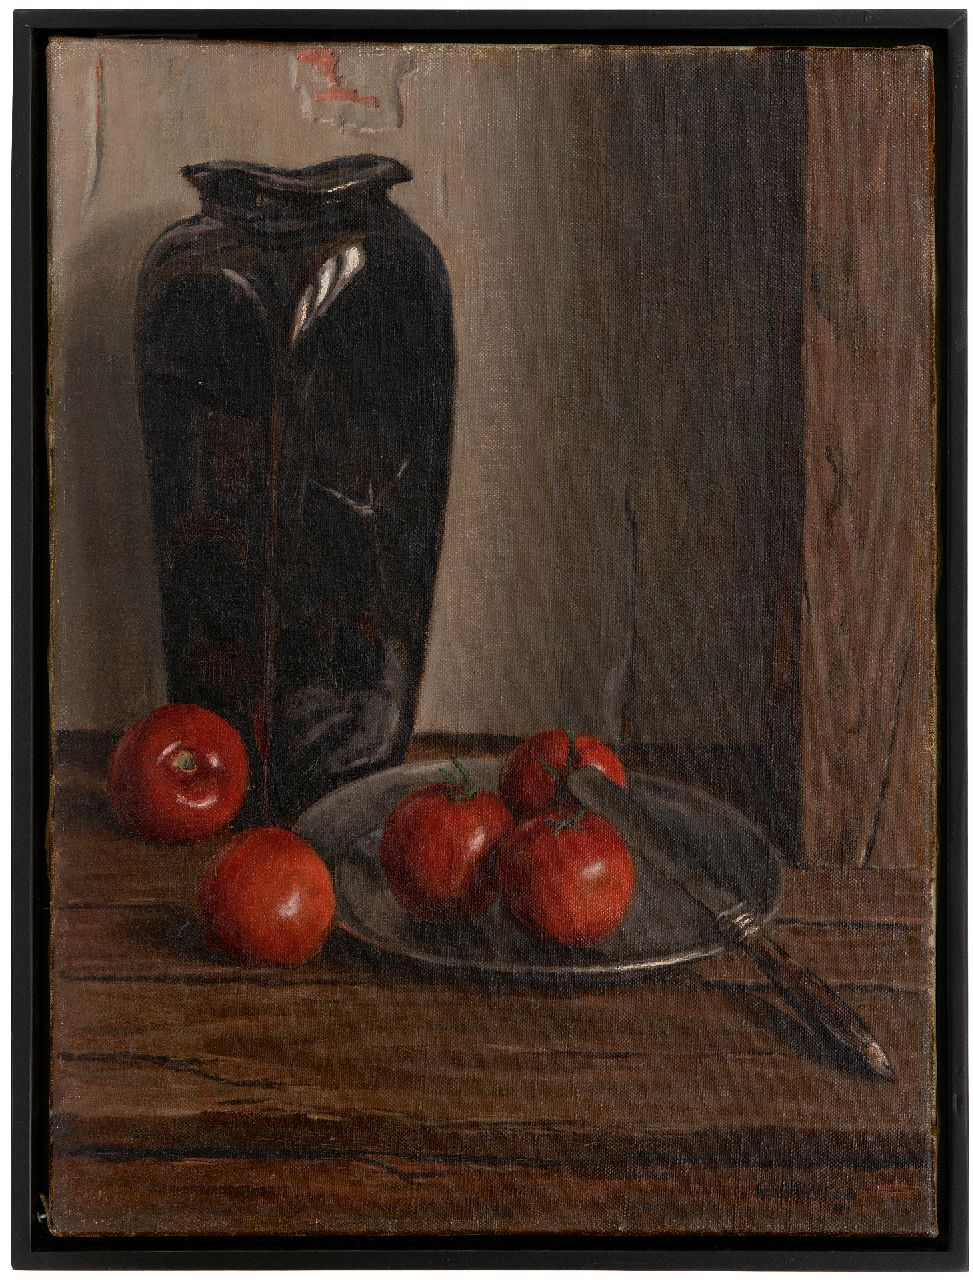 Hansen C.  | Co Hansen | Paintings offered for sale | Still life with a vase and tomatoes, oil on canvas 54.4 x 40.5 cm